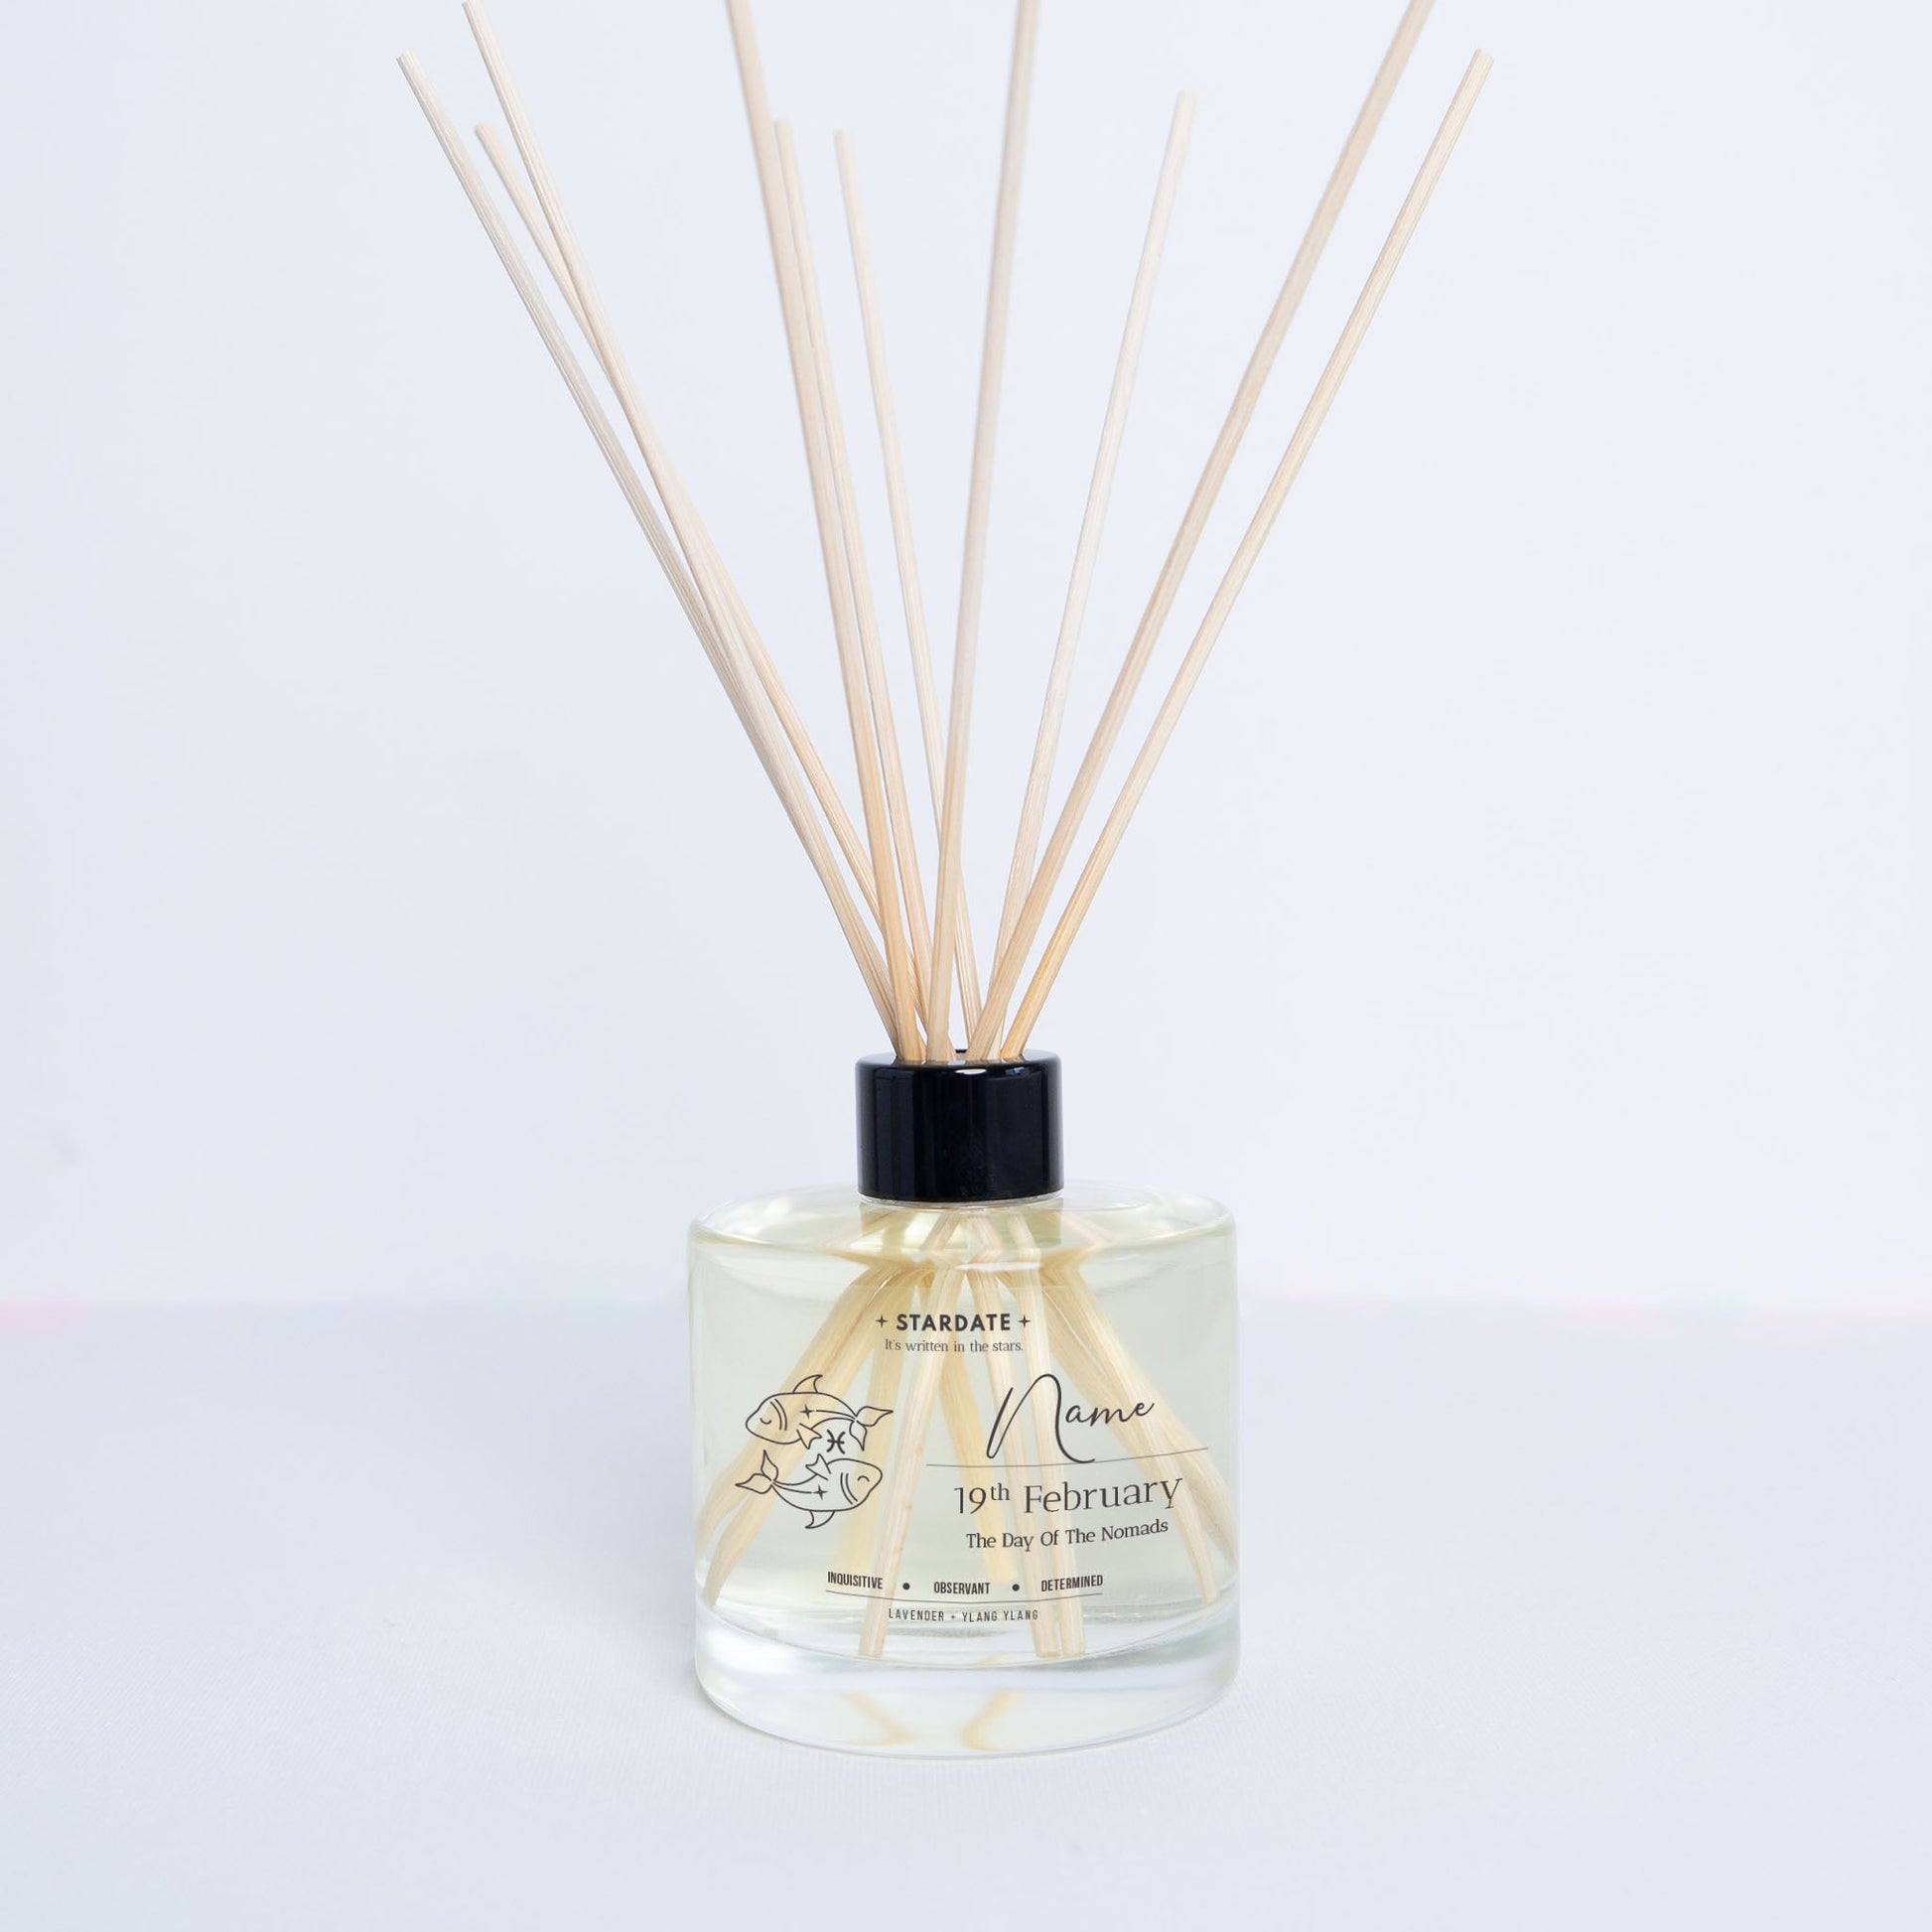 stardate-reed-diffuser-february-nineteen